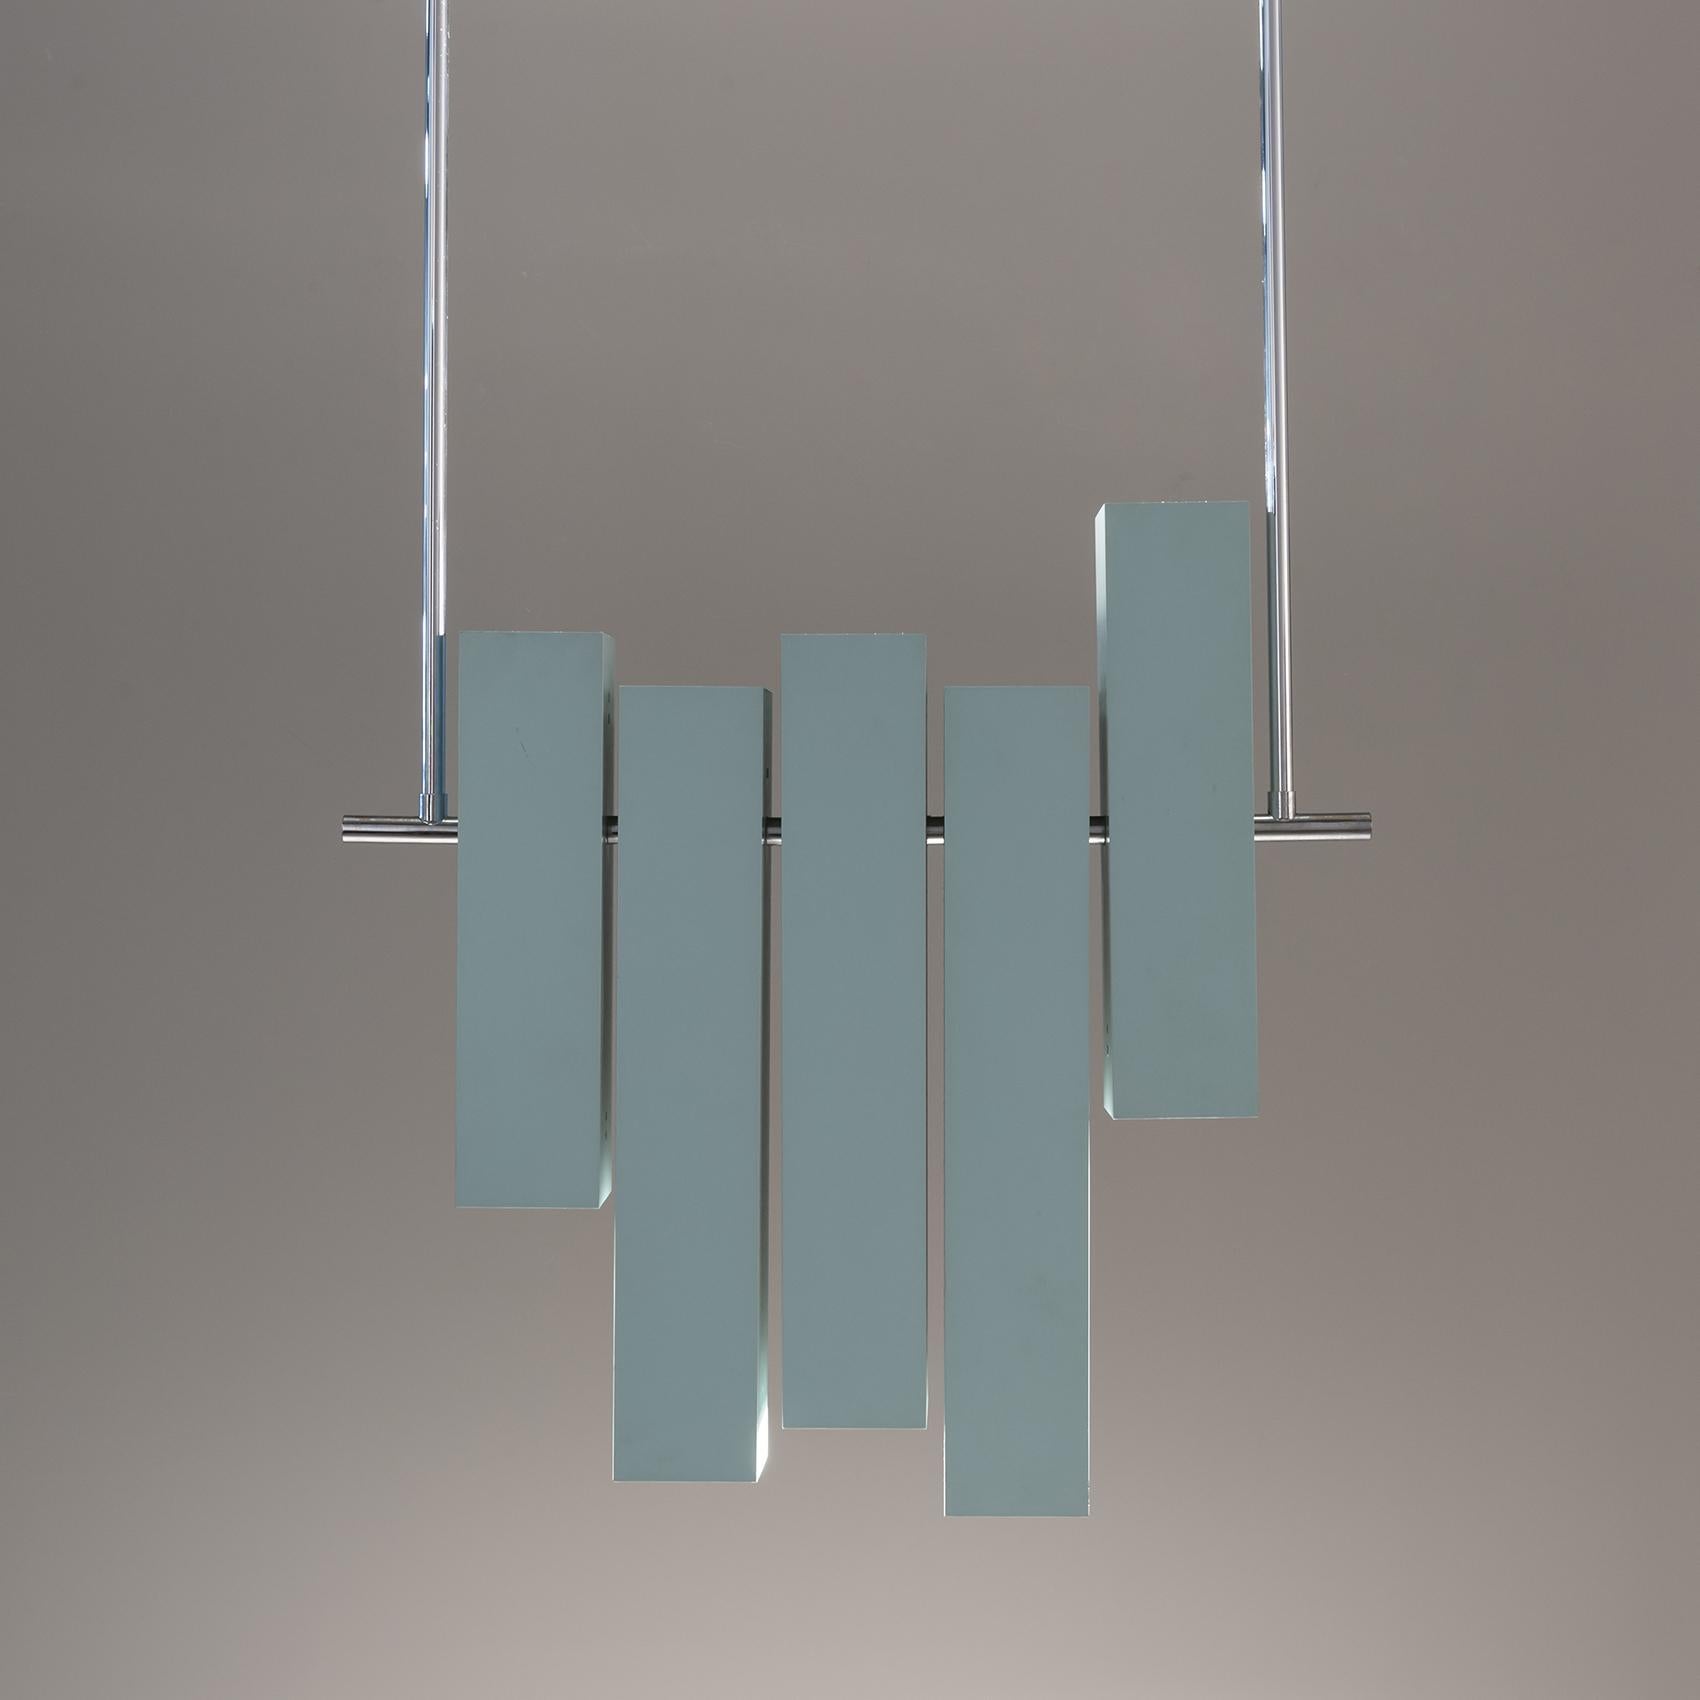 Rare prototype created by Di Bernardo, an italian architect, for Lumi Italia.

Pendant lamp created in the 1970s for an interior architecture project in Milan, the pendant light was never manufactured. A very geometric lamp, it is composed of